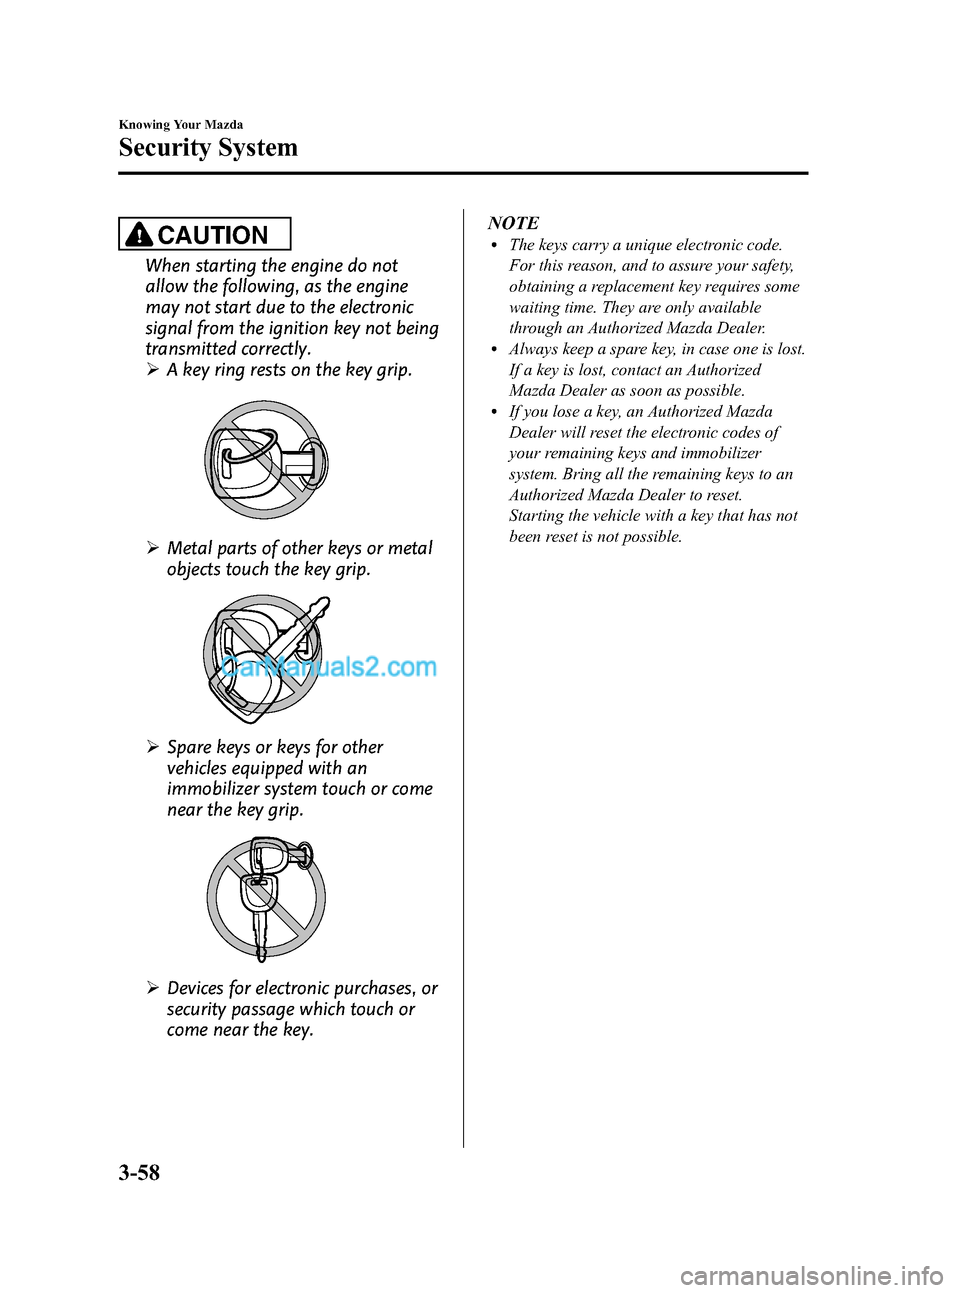 MAZDA MODEL MAZDASPEED 3 2011  Owners Manual (in English) Black plate (134,1)
CAUTION
When starting the engine do not
allow the following, as the engine
may not start due to the electronic
signal from the ignition key not being
transmitted correctly.
ØA key